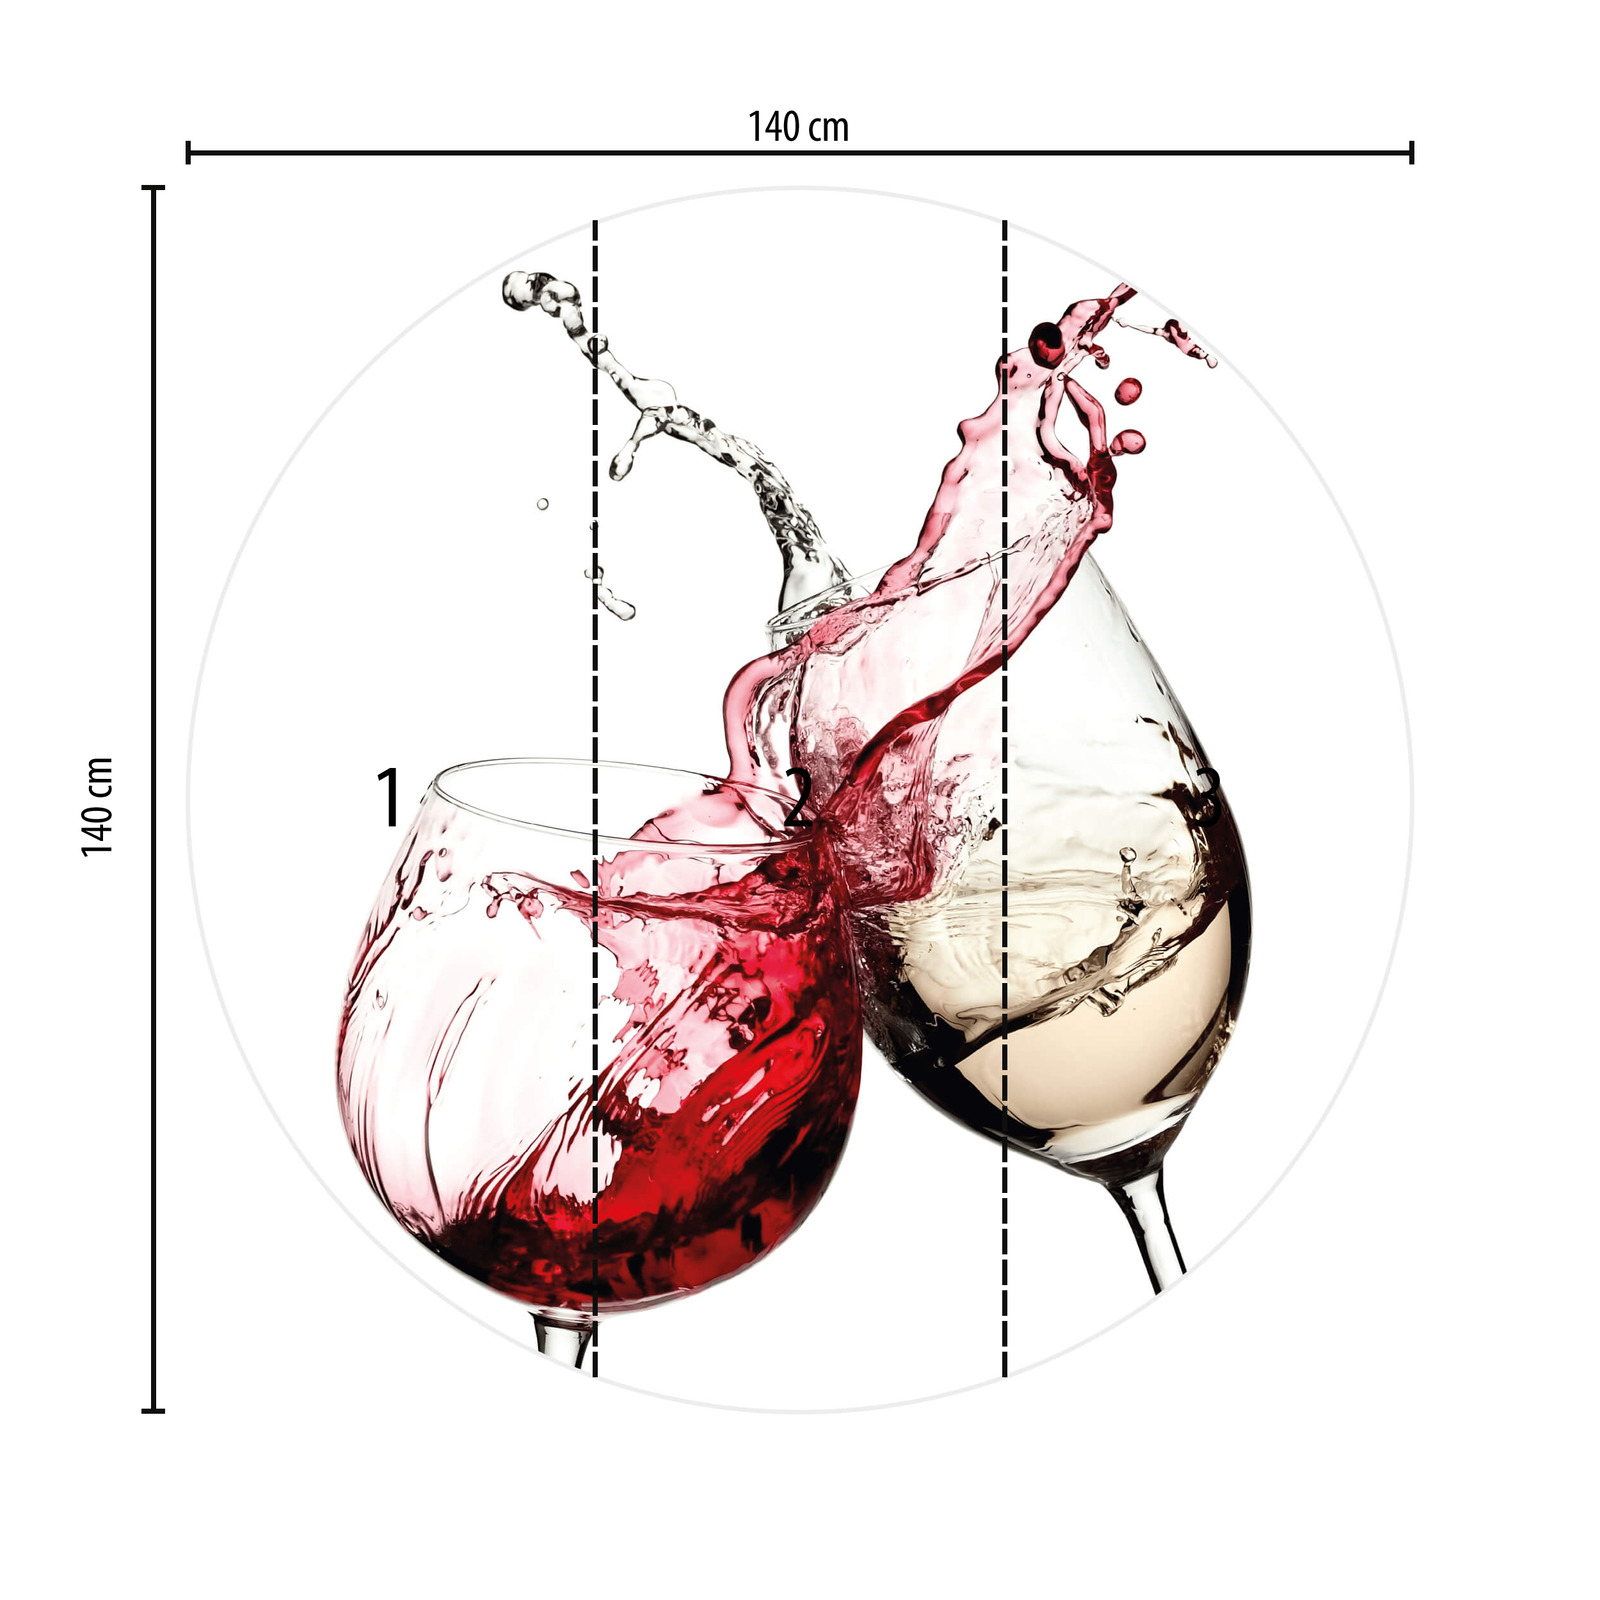             Kitchen mural drinks in glass, wine red & white
        